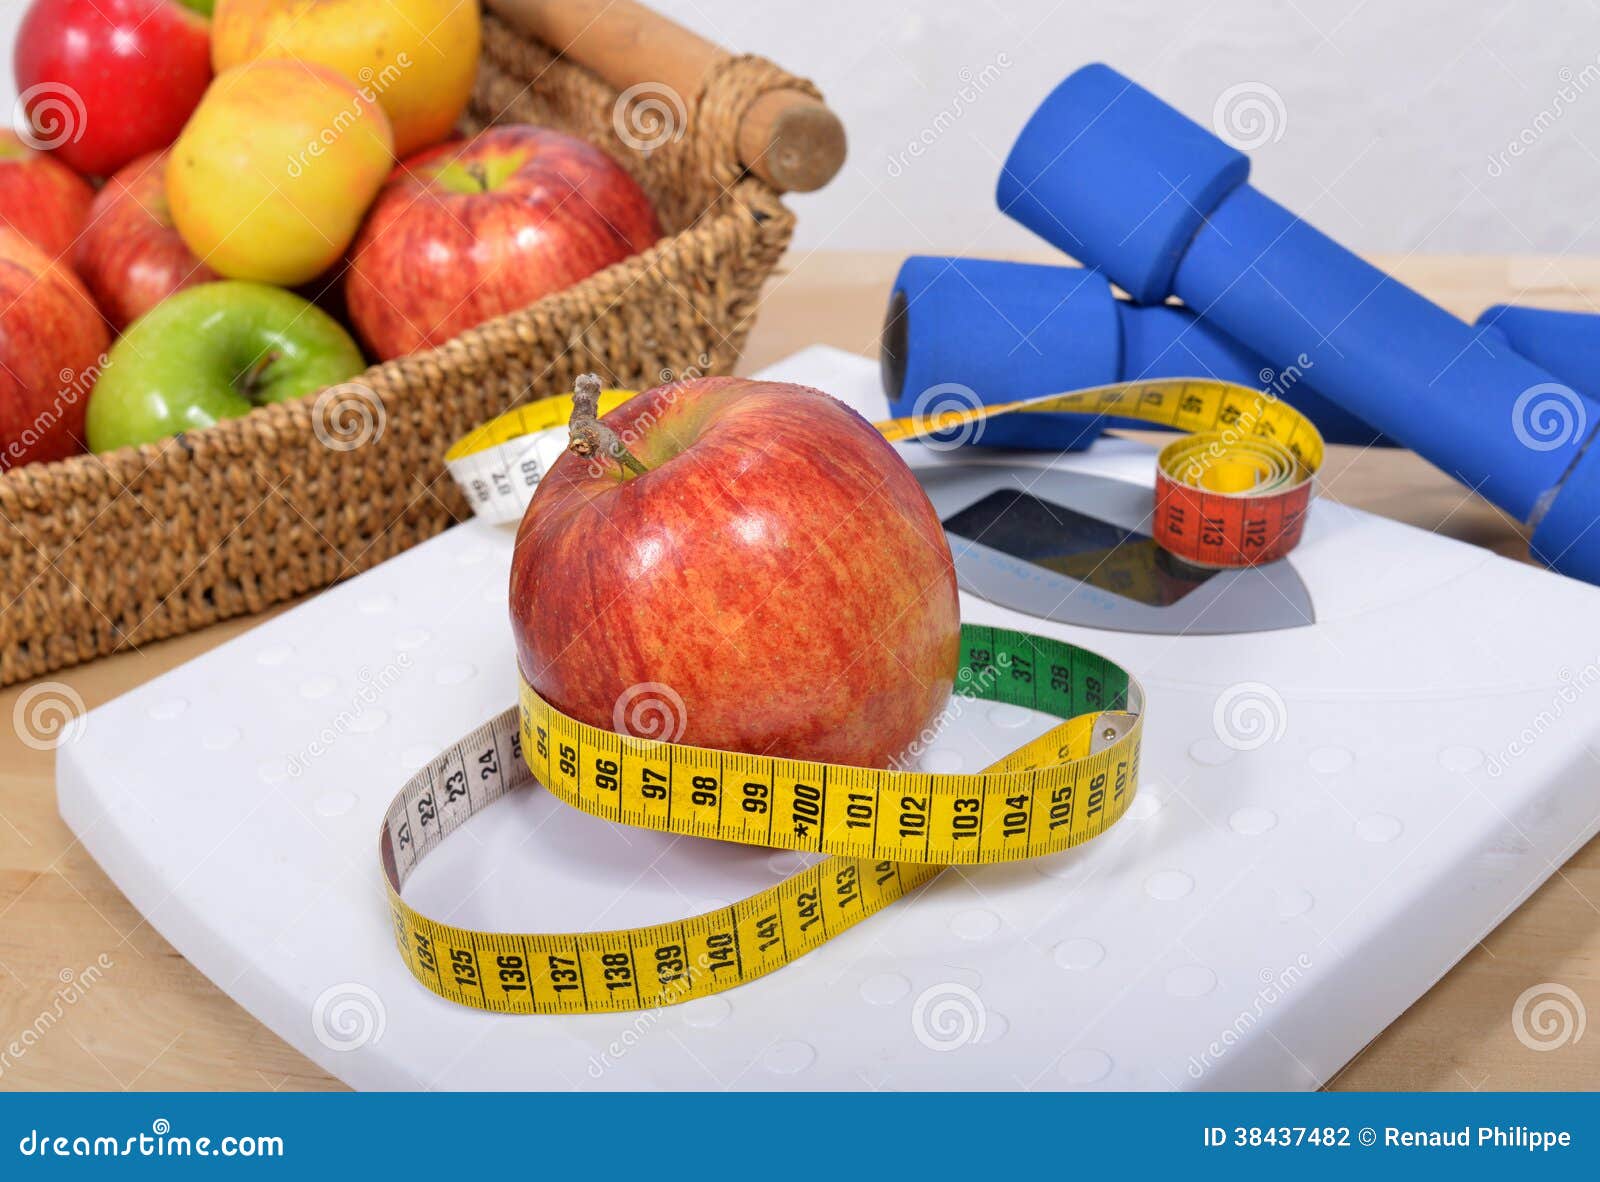 apple placed on a scales,